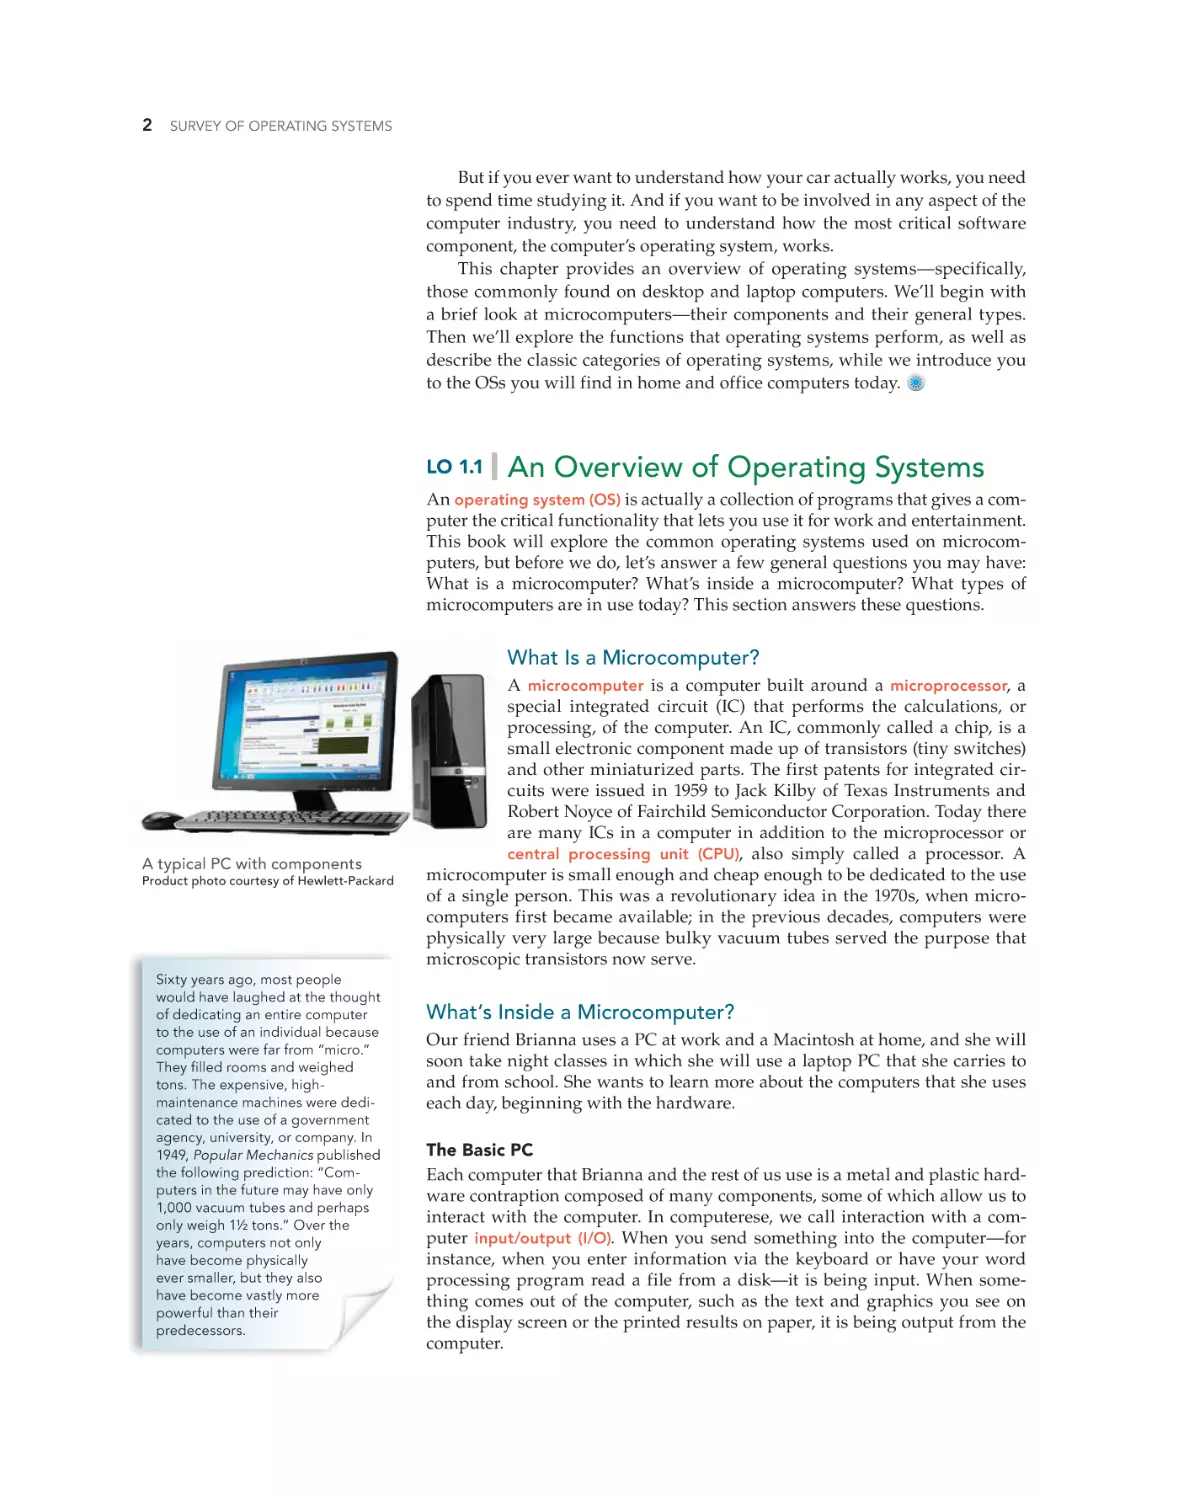 An Overview of Operating Systems
What Is a Microcomputer?
What’s Inside a Microcomputer?